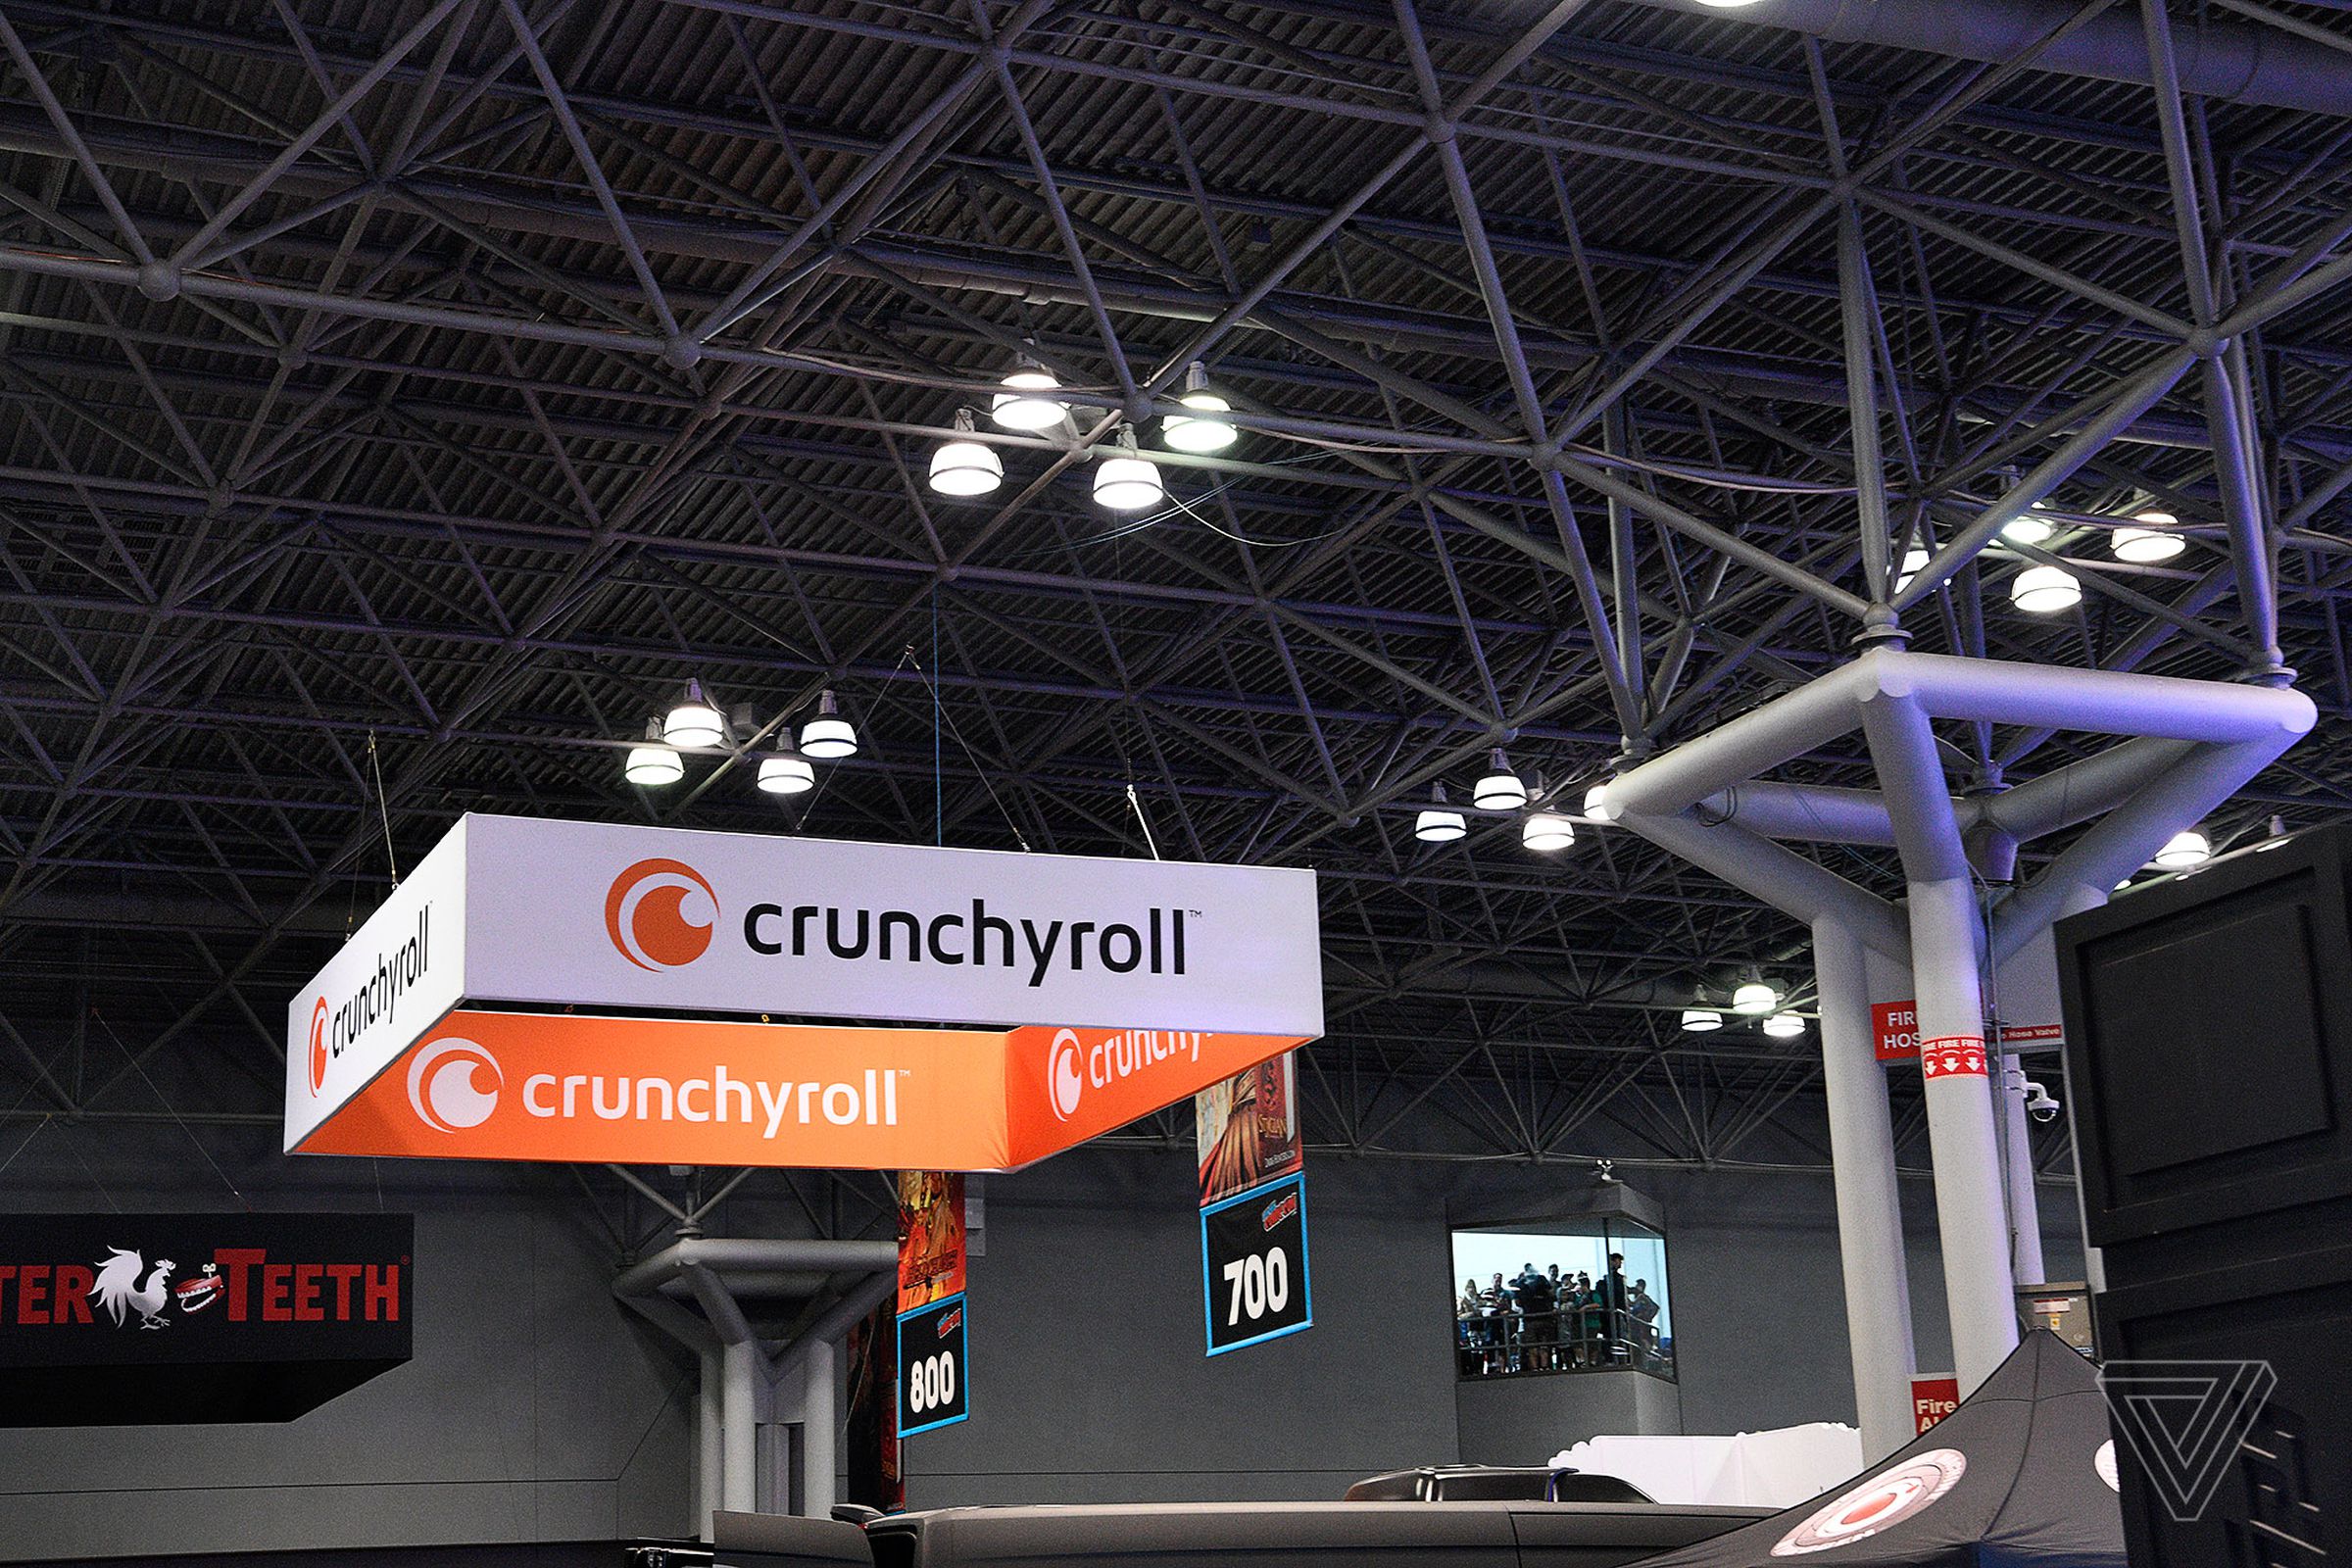 An image of a orange and white banner on a booth saying Crunchyroll.